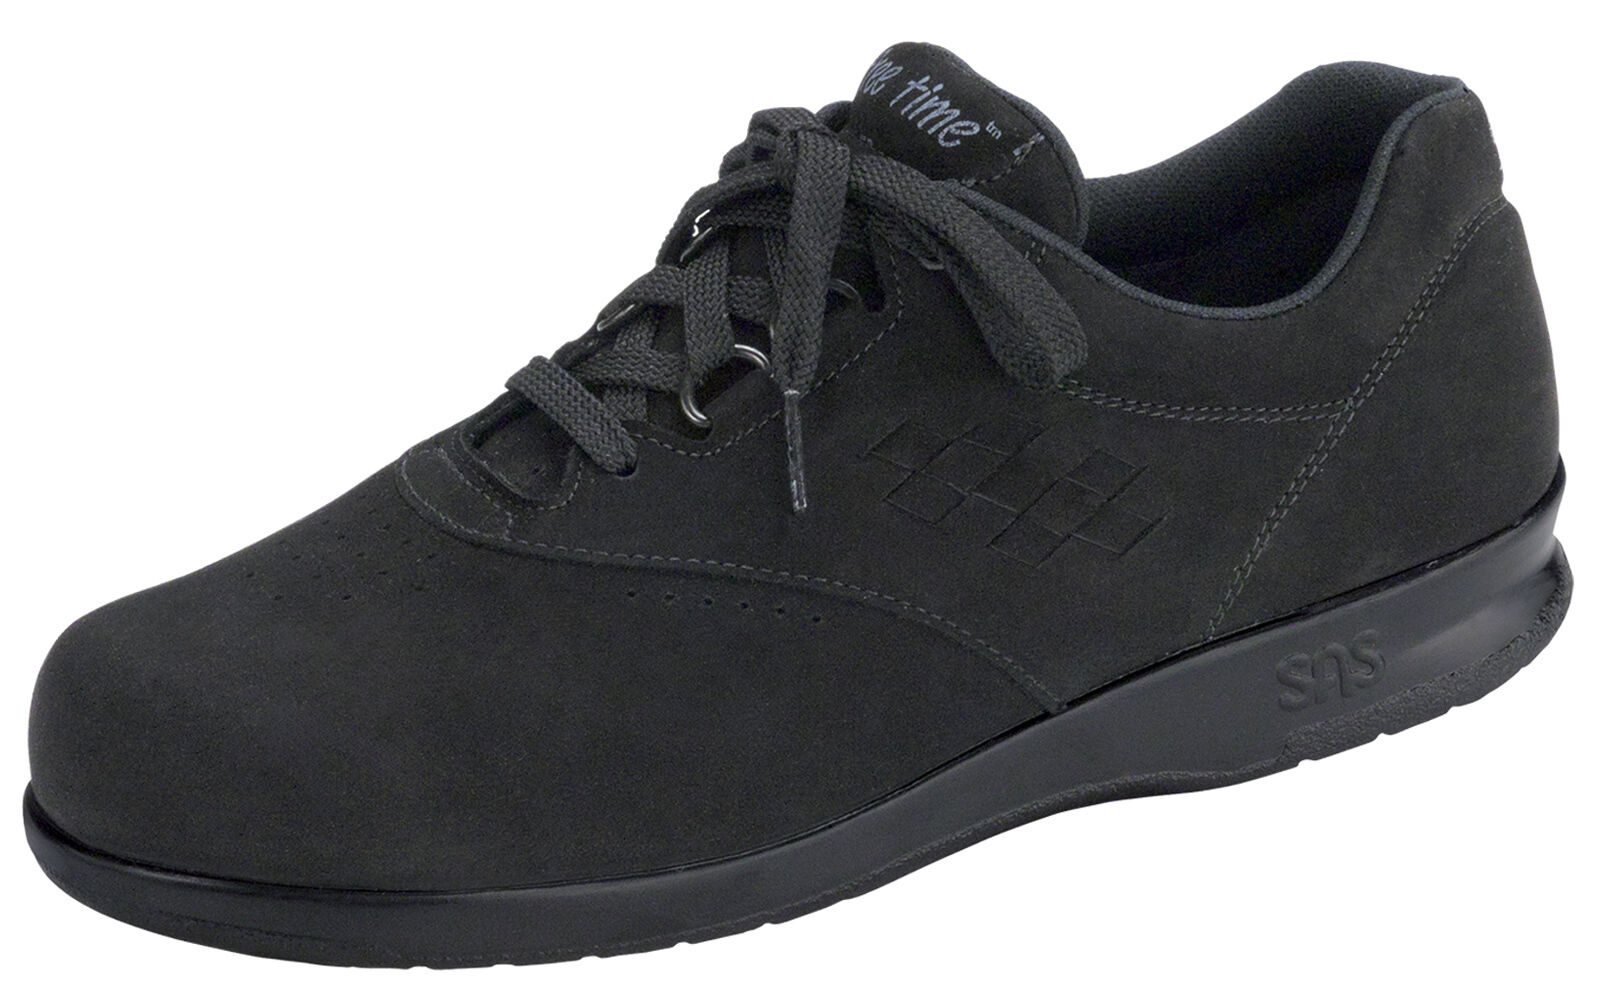 SAS Women's Shoes Free Time Charcoal 7.5 WW Double Wide FREE SHIPPING New In Box 